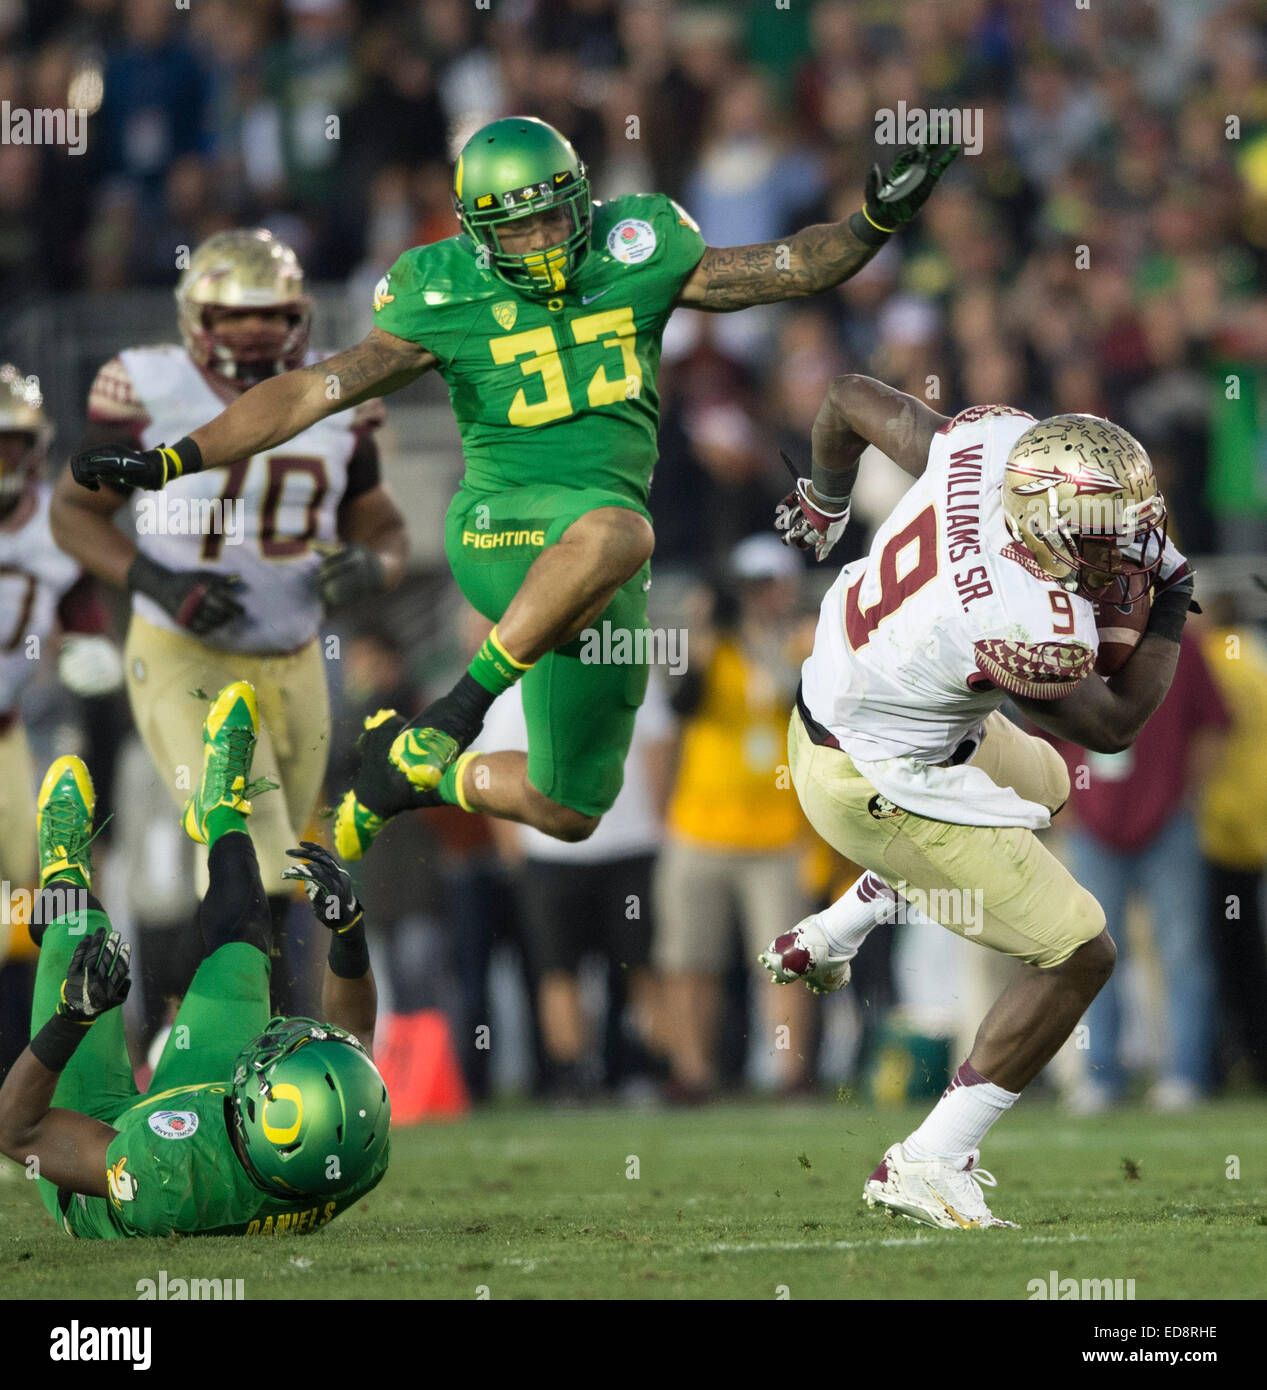 Los Angeles, USA. 1st Jan, 2015. Karlos Williams (R) of Florida State Seminoles breaks through during the 2015 Rose Bowl college football game against the Oregon Ducks at Rose Bowl in Los Angeles, the United States, Jan. 1, 2015. Oregon Ducks won the game 59-20. Credit:  Yang Lei/Xinhua/Alamy Live News Stock Photo